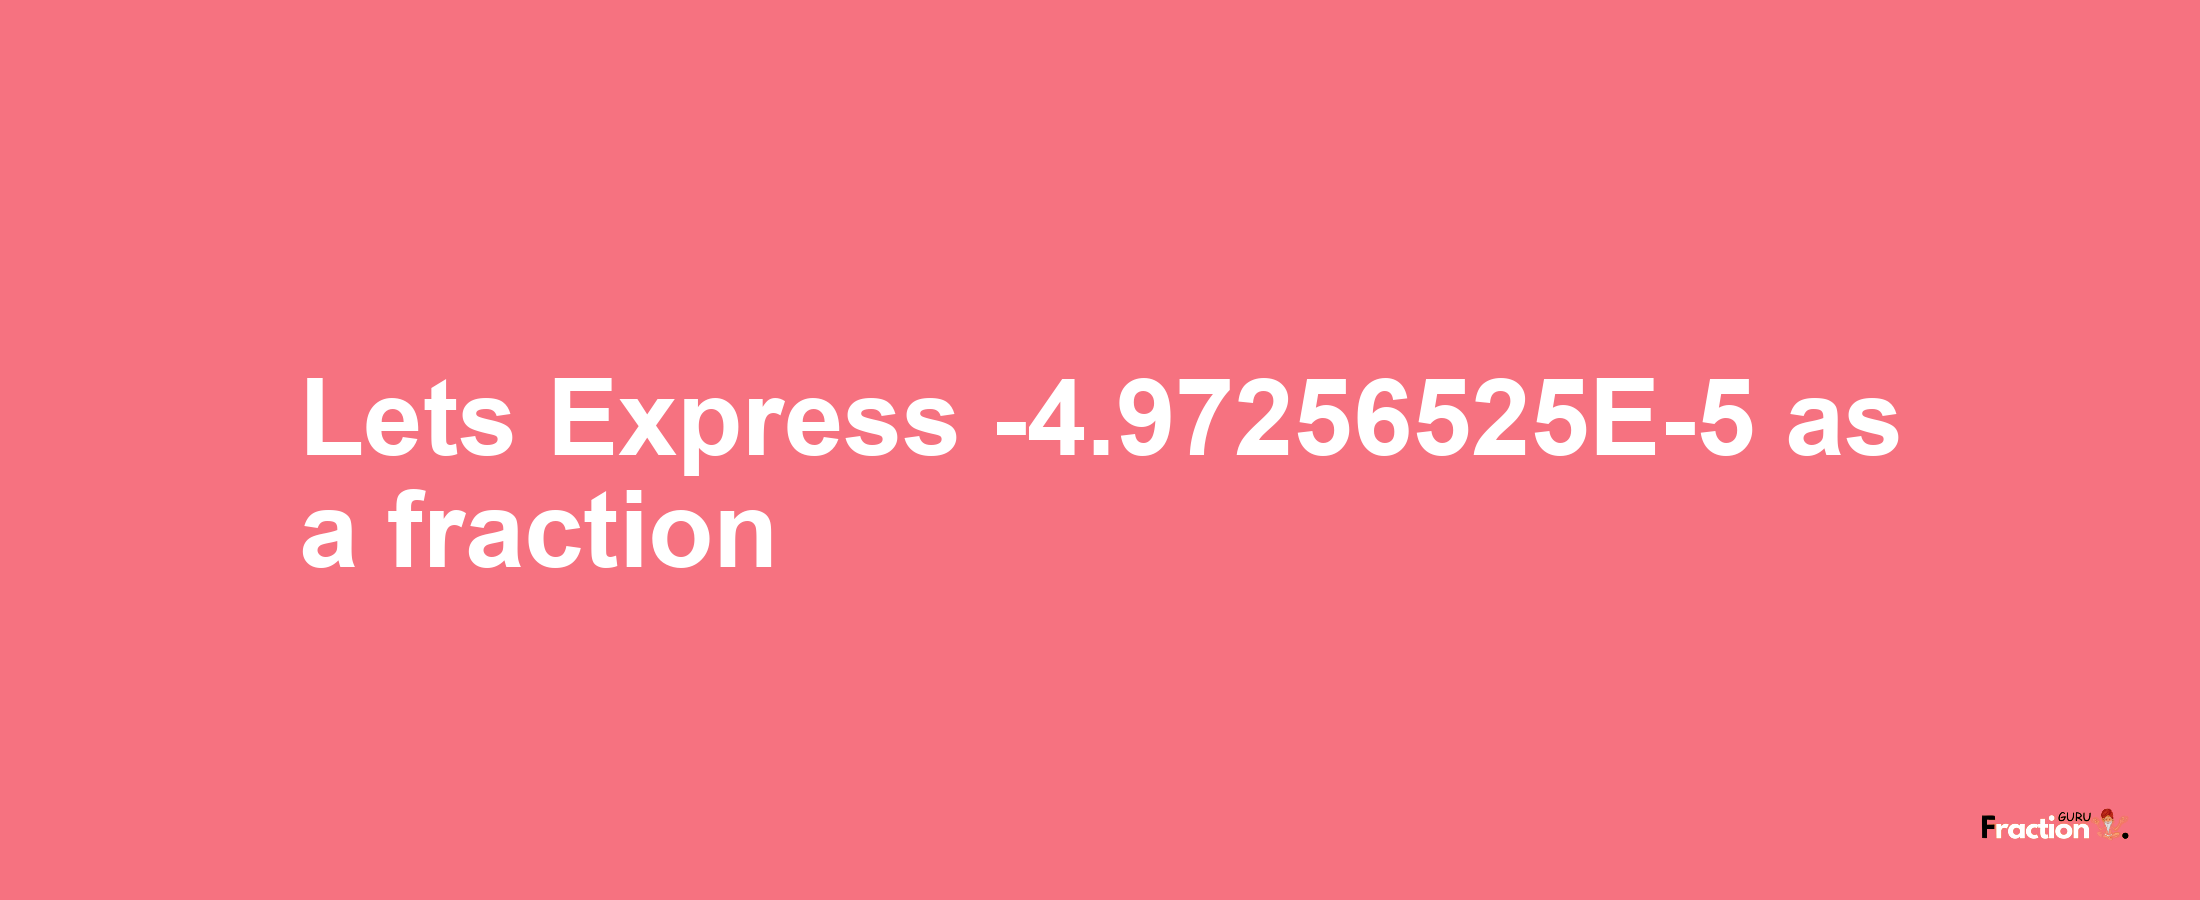 Lets Express -4.97256525E-5 as afraction